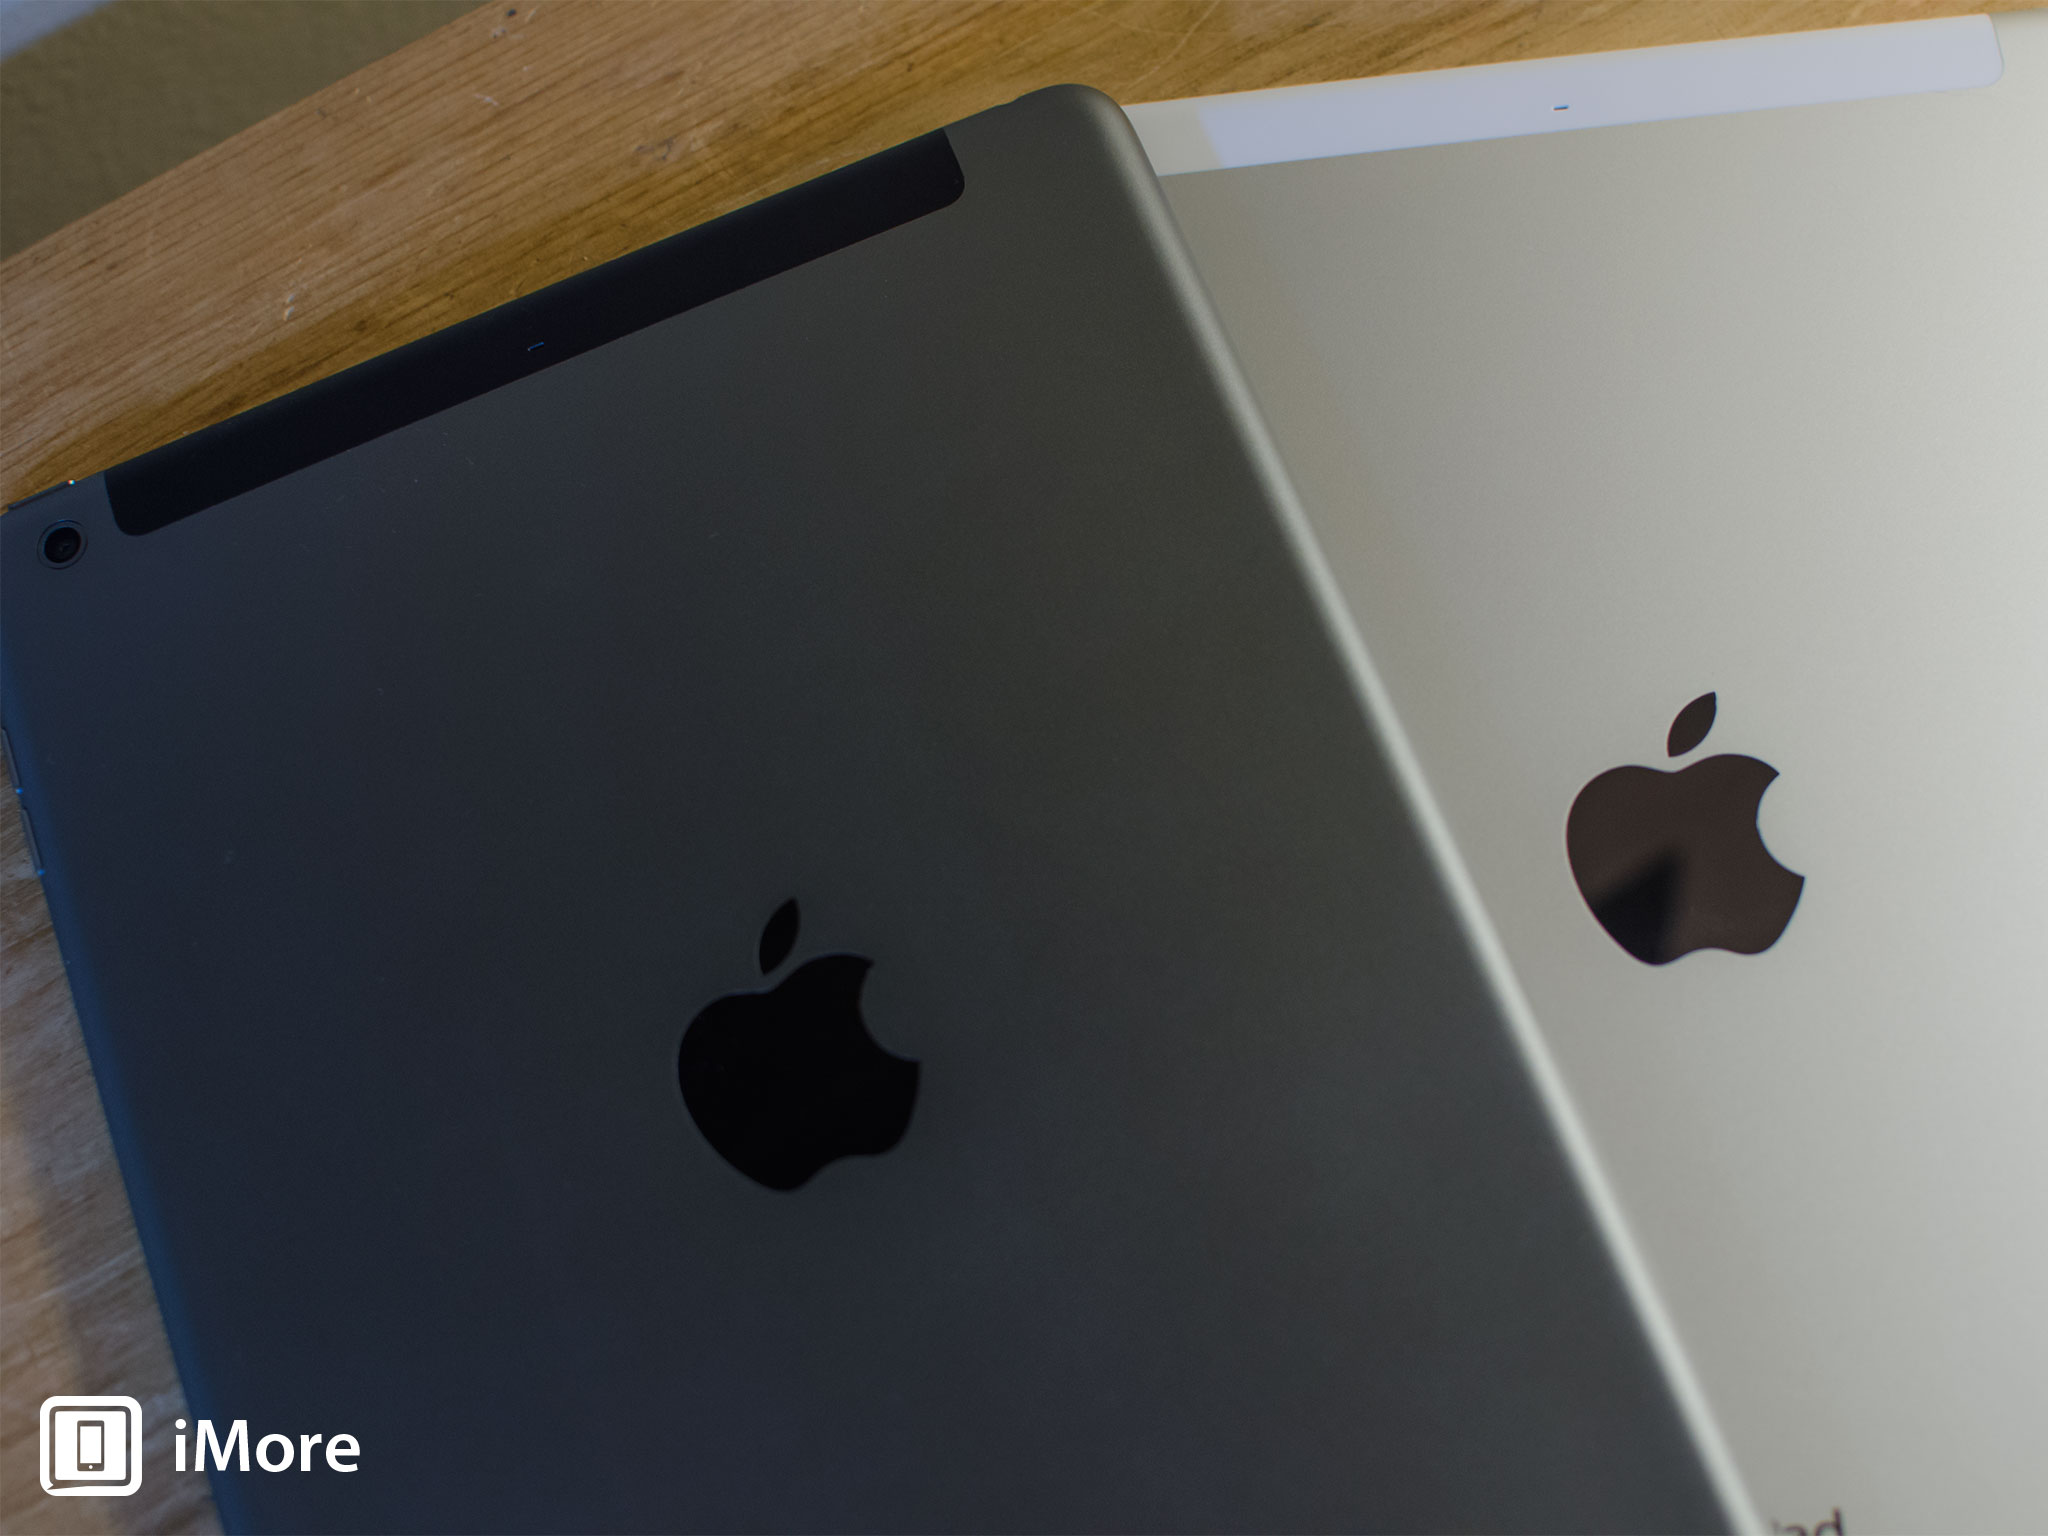 iPad Air photo gallery: Silver and Space Gray! | iMore